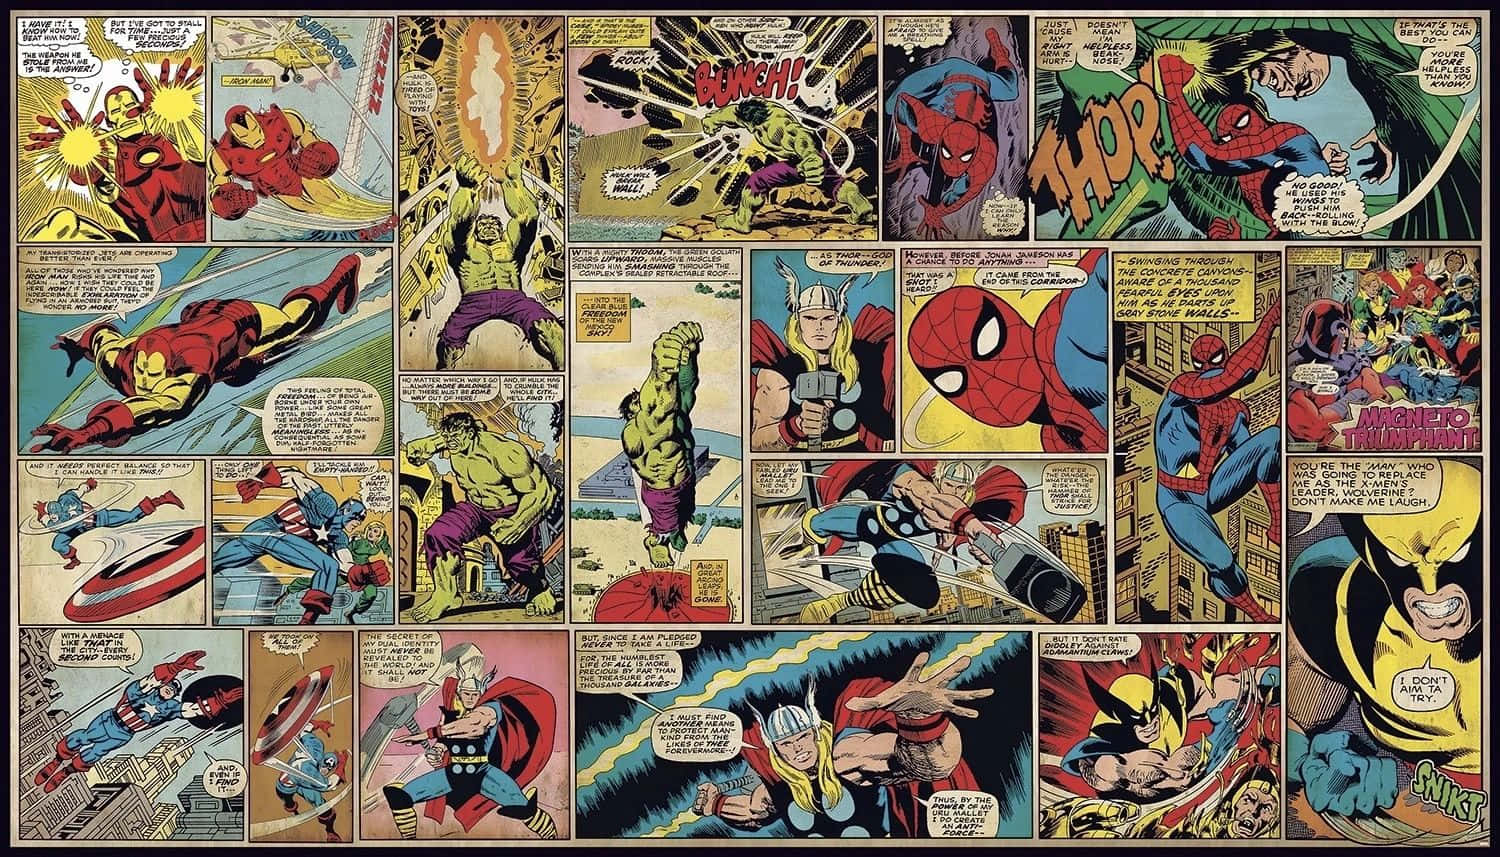 The worlds of Comics and Beyond